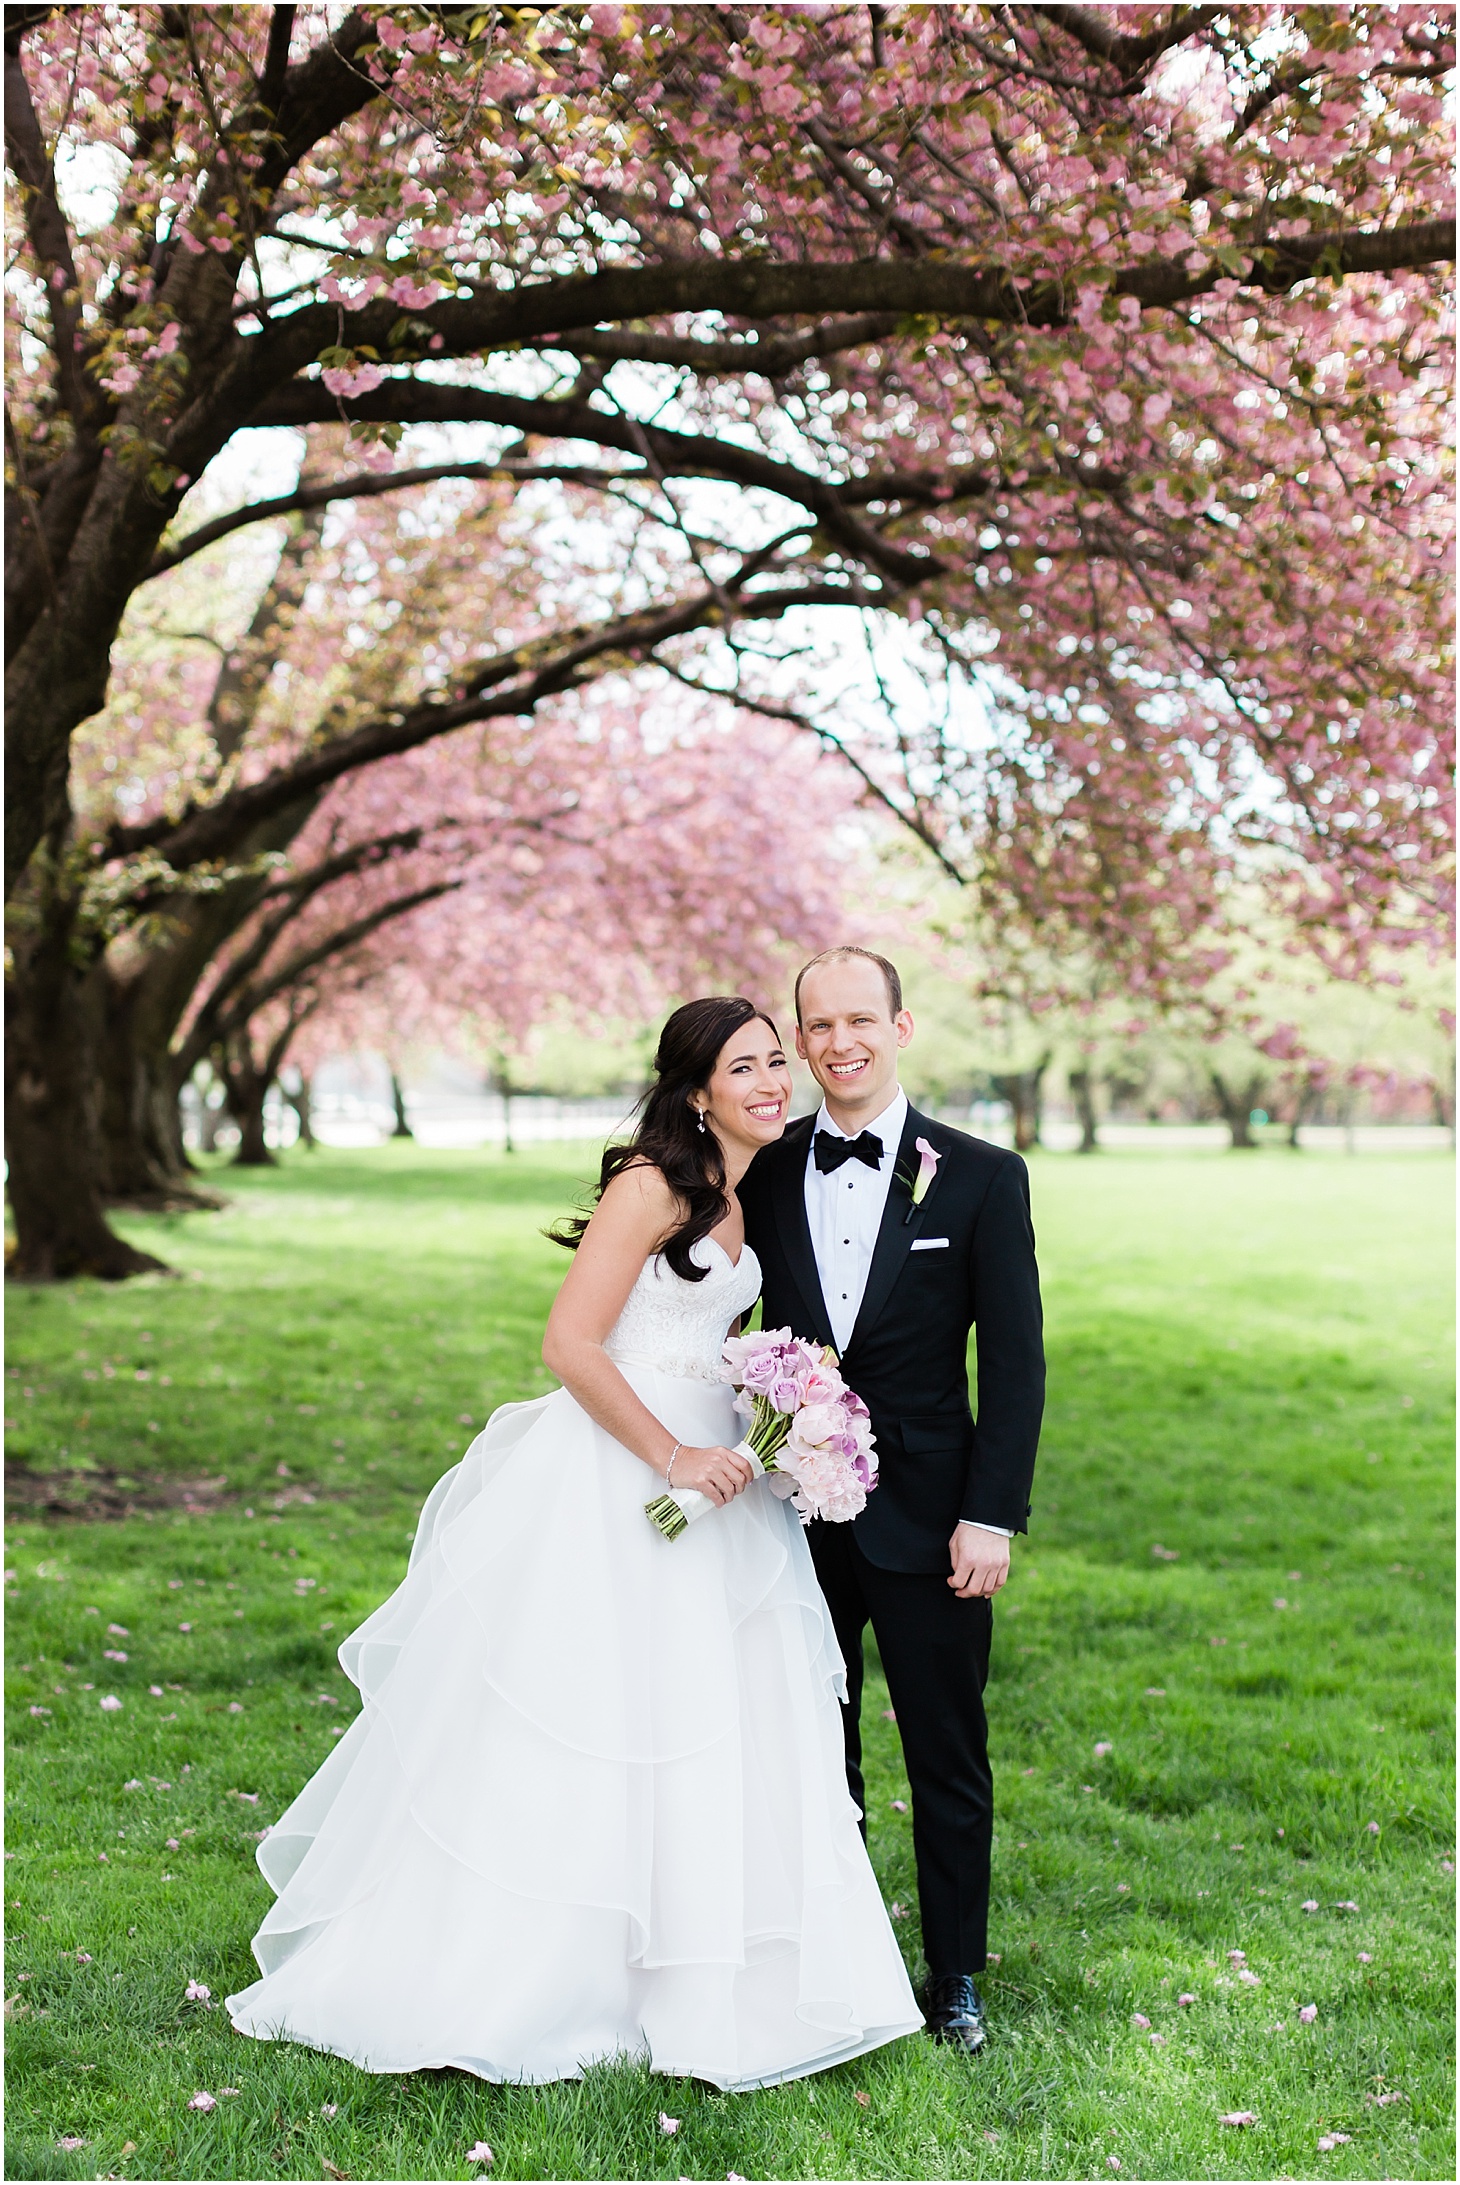 Cherry Blossom Wedding Portrait, Museum-Inspired Spring Wedding at National Museum of Women in the Arts, Sarah Bradshaw Photography, DC Wedding Photographer